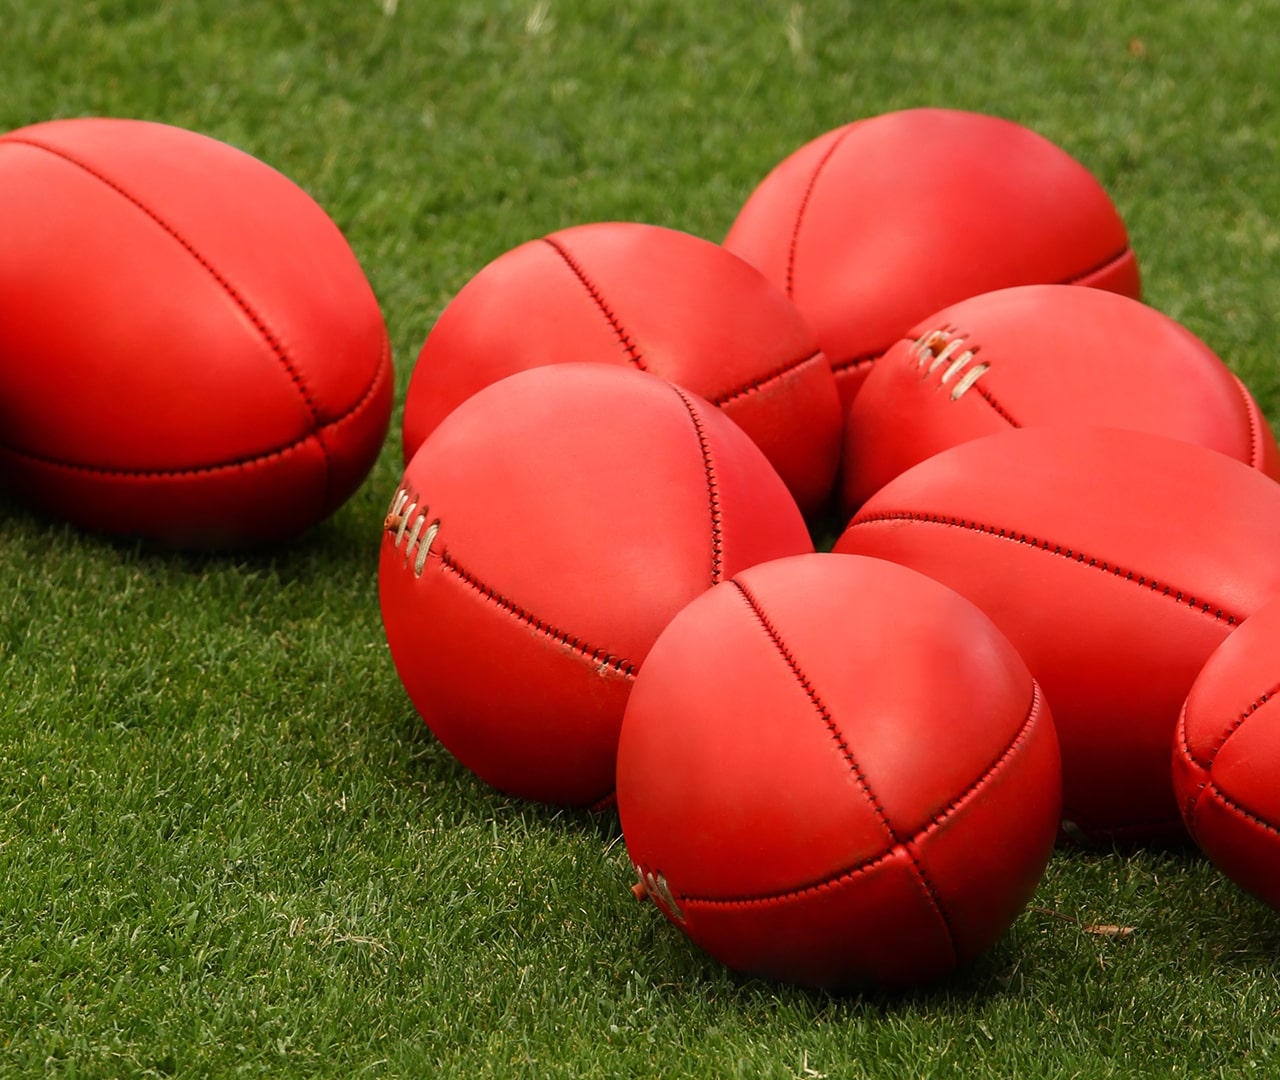 Red AFL footballs on the grass